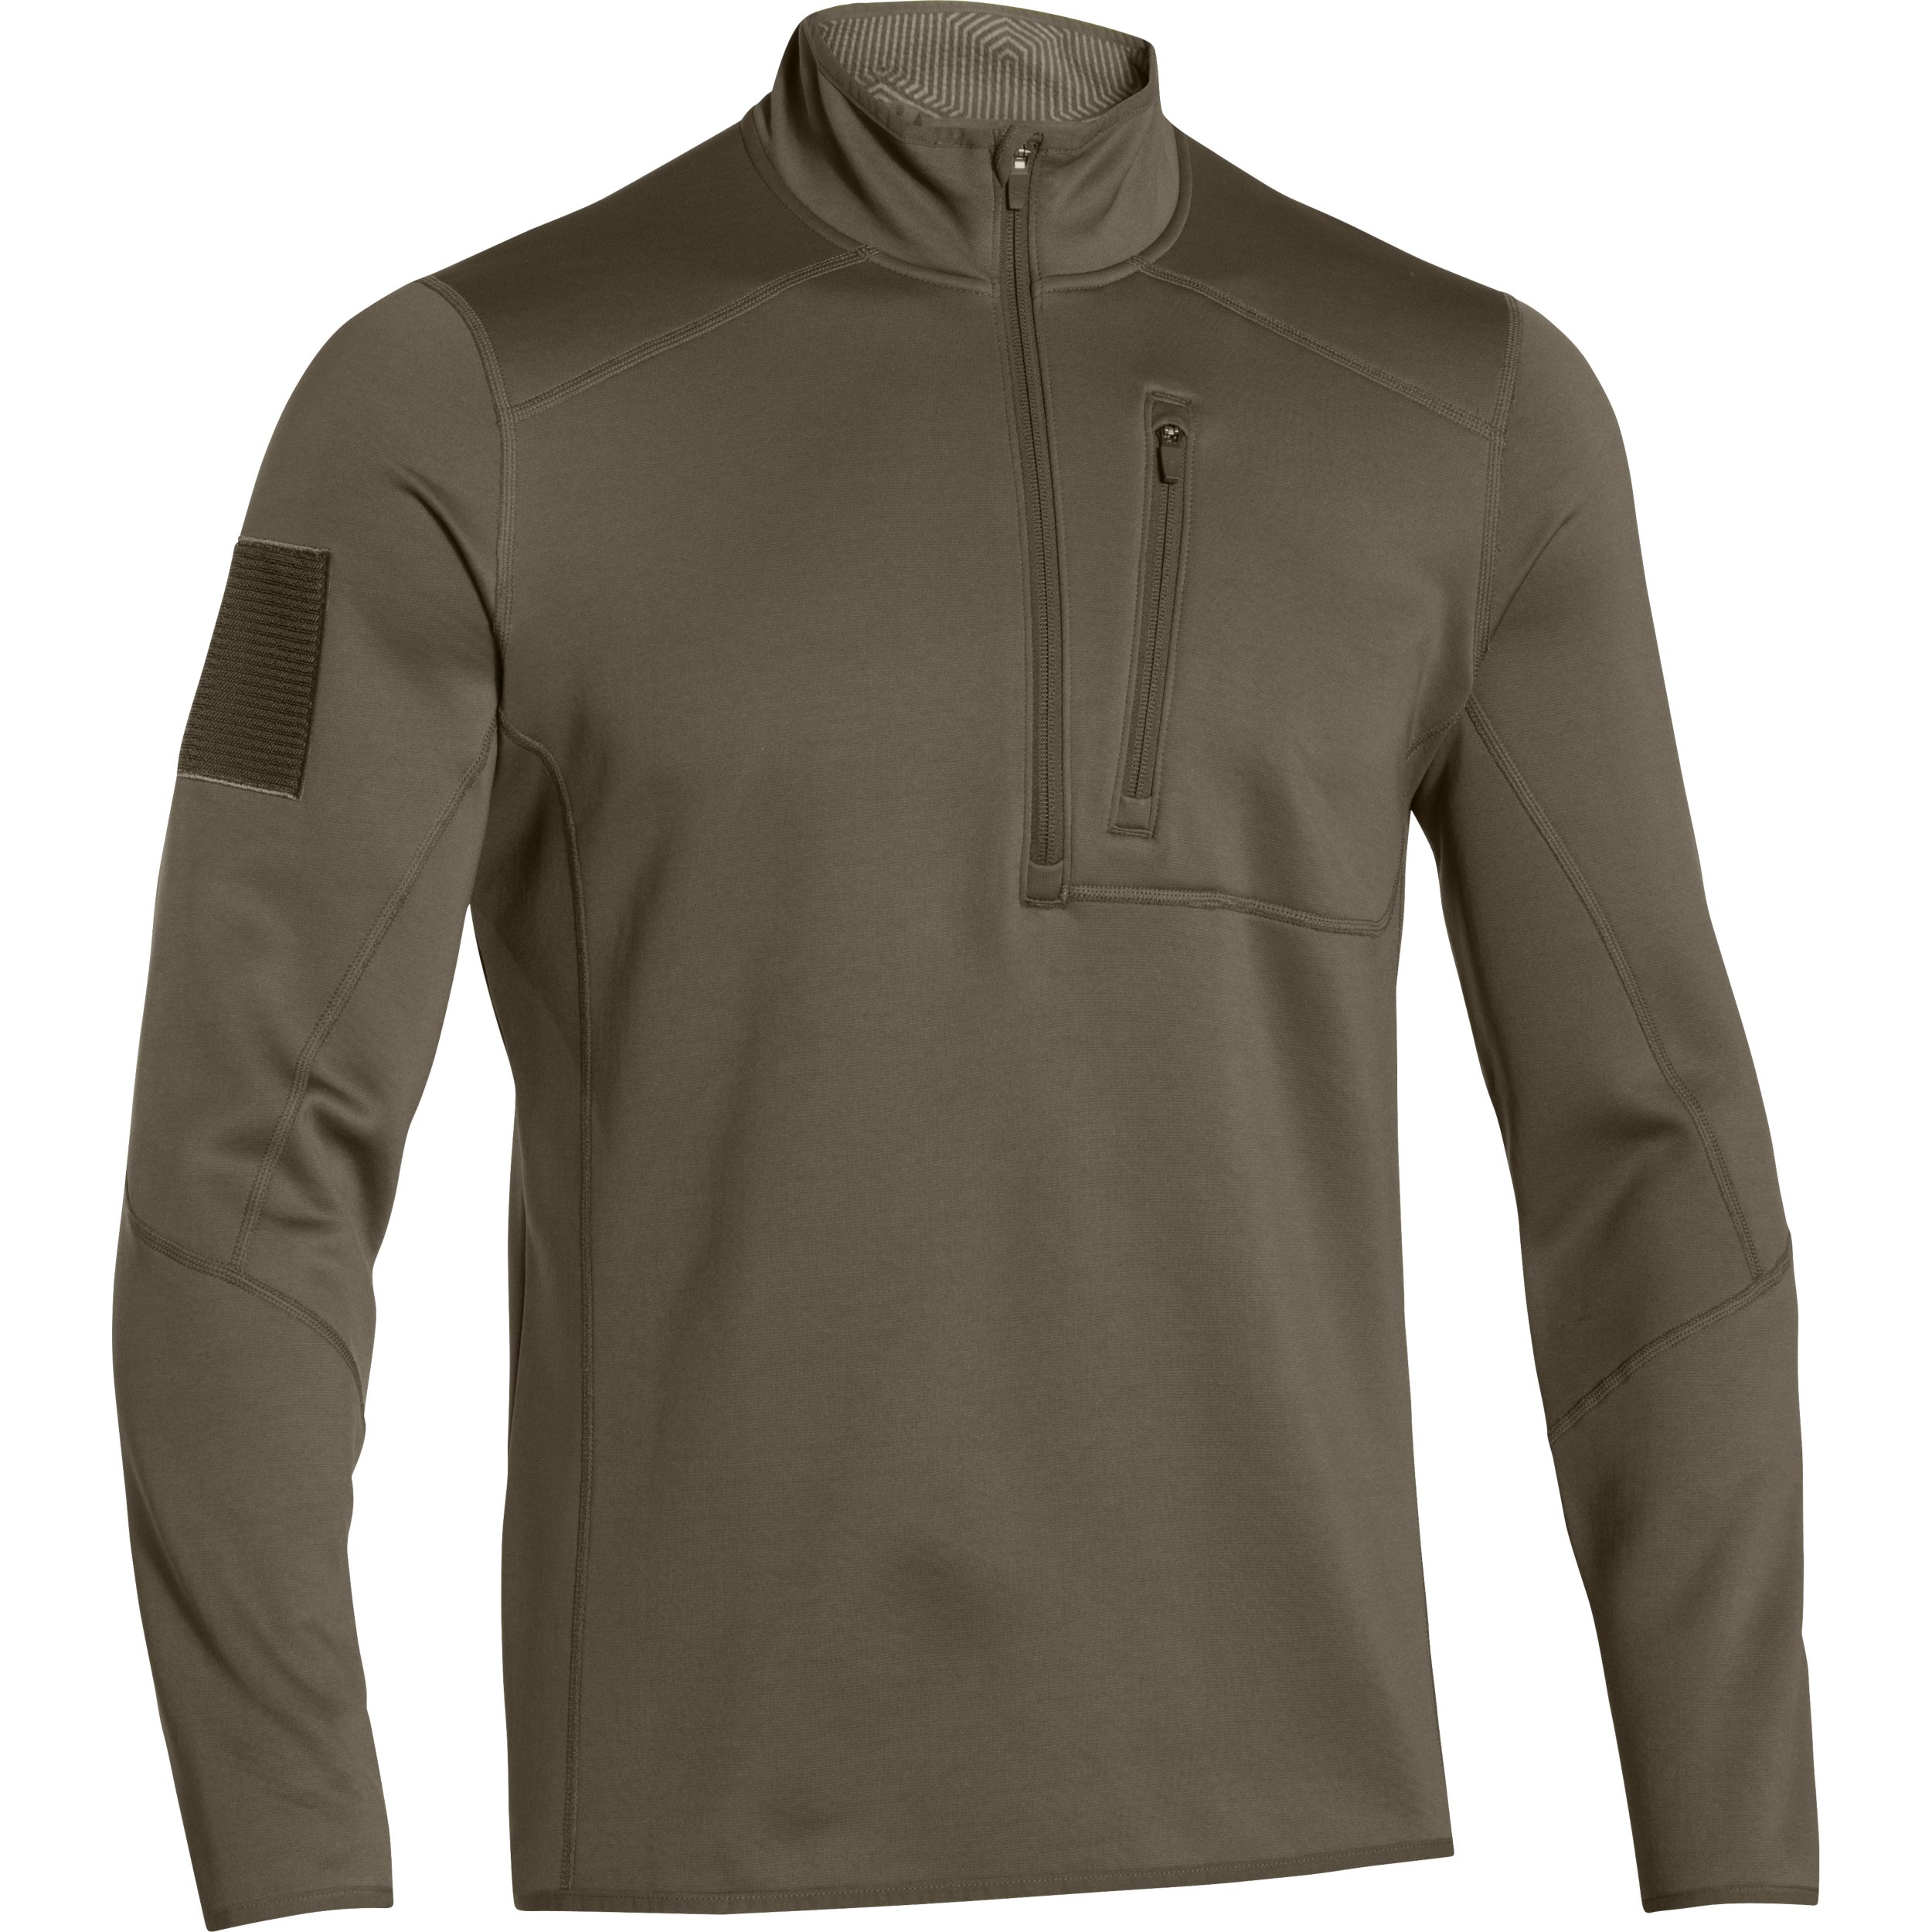 Under Armour SS18 male shirt